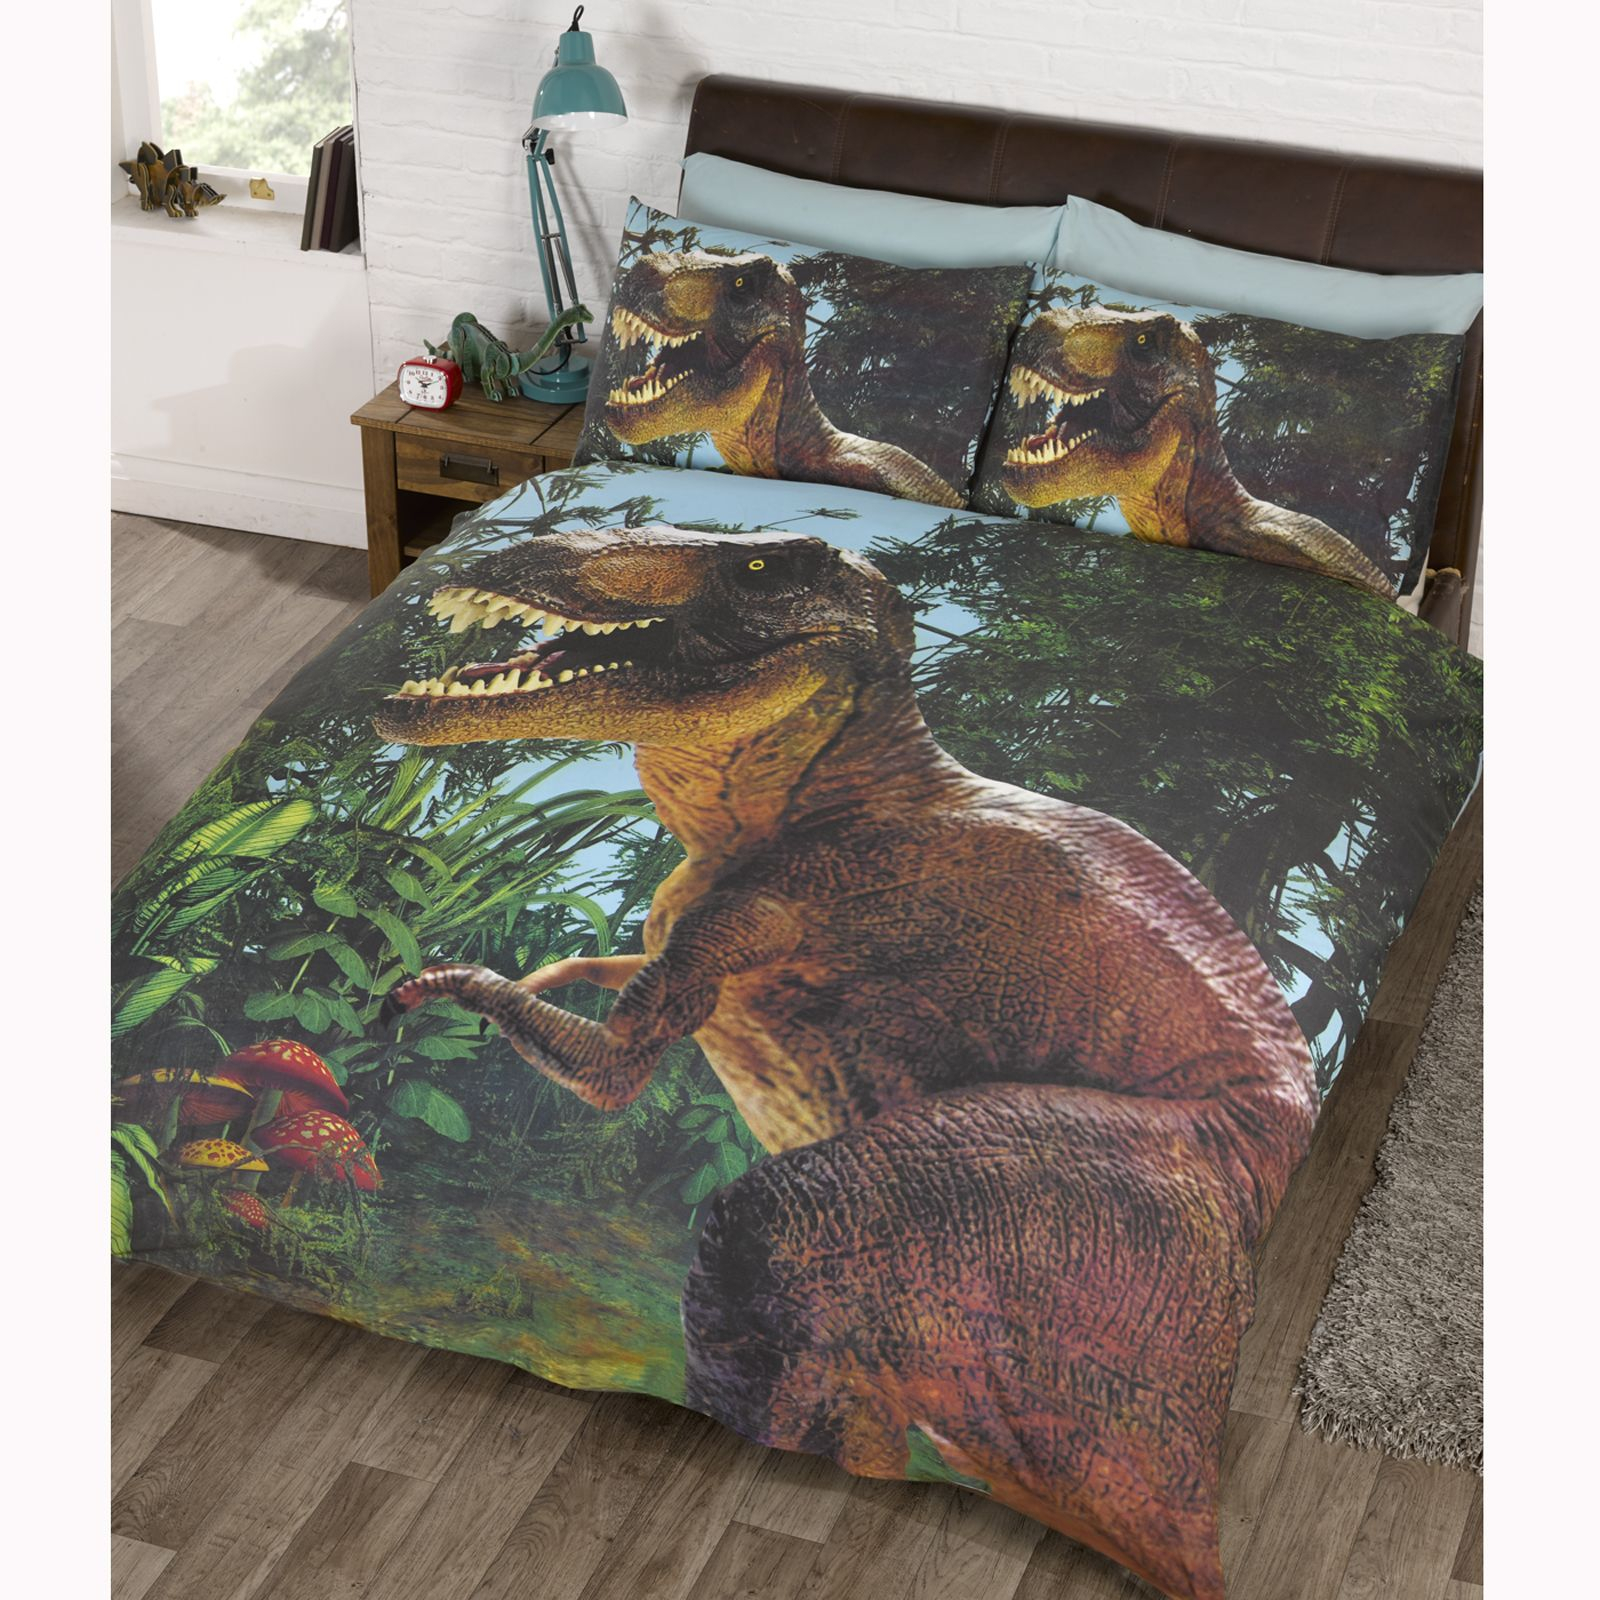 Details About Jurassic T Rex Dinosaur Duvet Cover Sets In Single Or Double Size Kids Bedroom in proportions 1600 X 1600